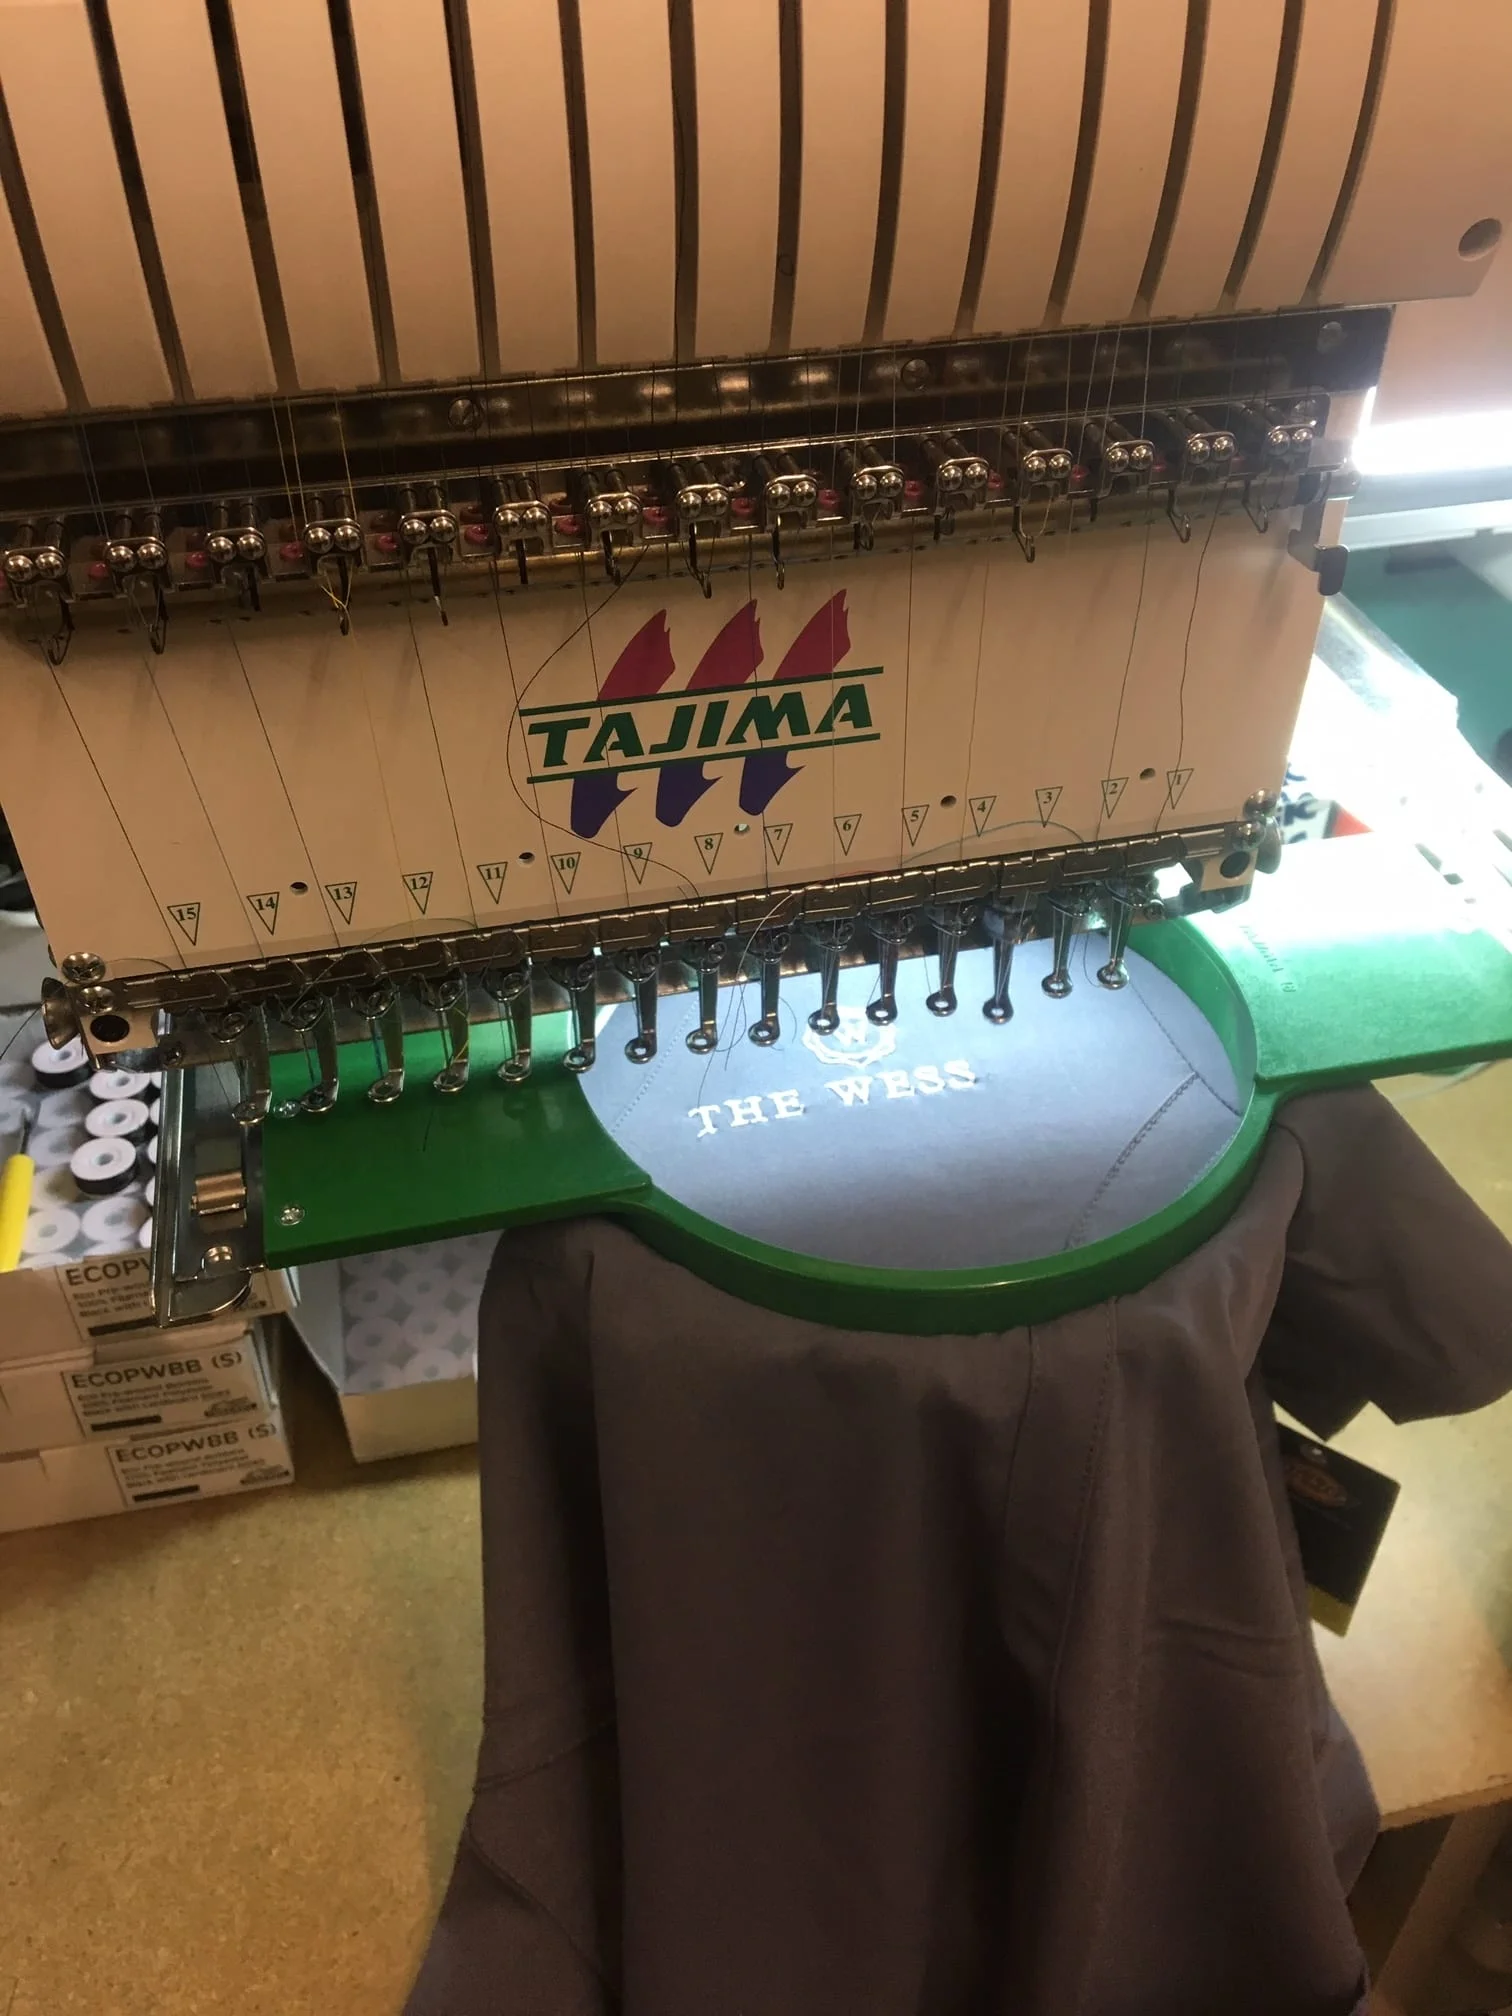 Embroidery in action